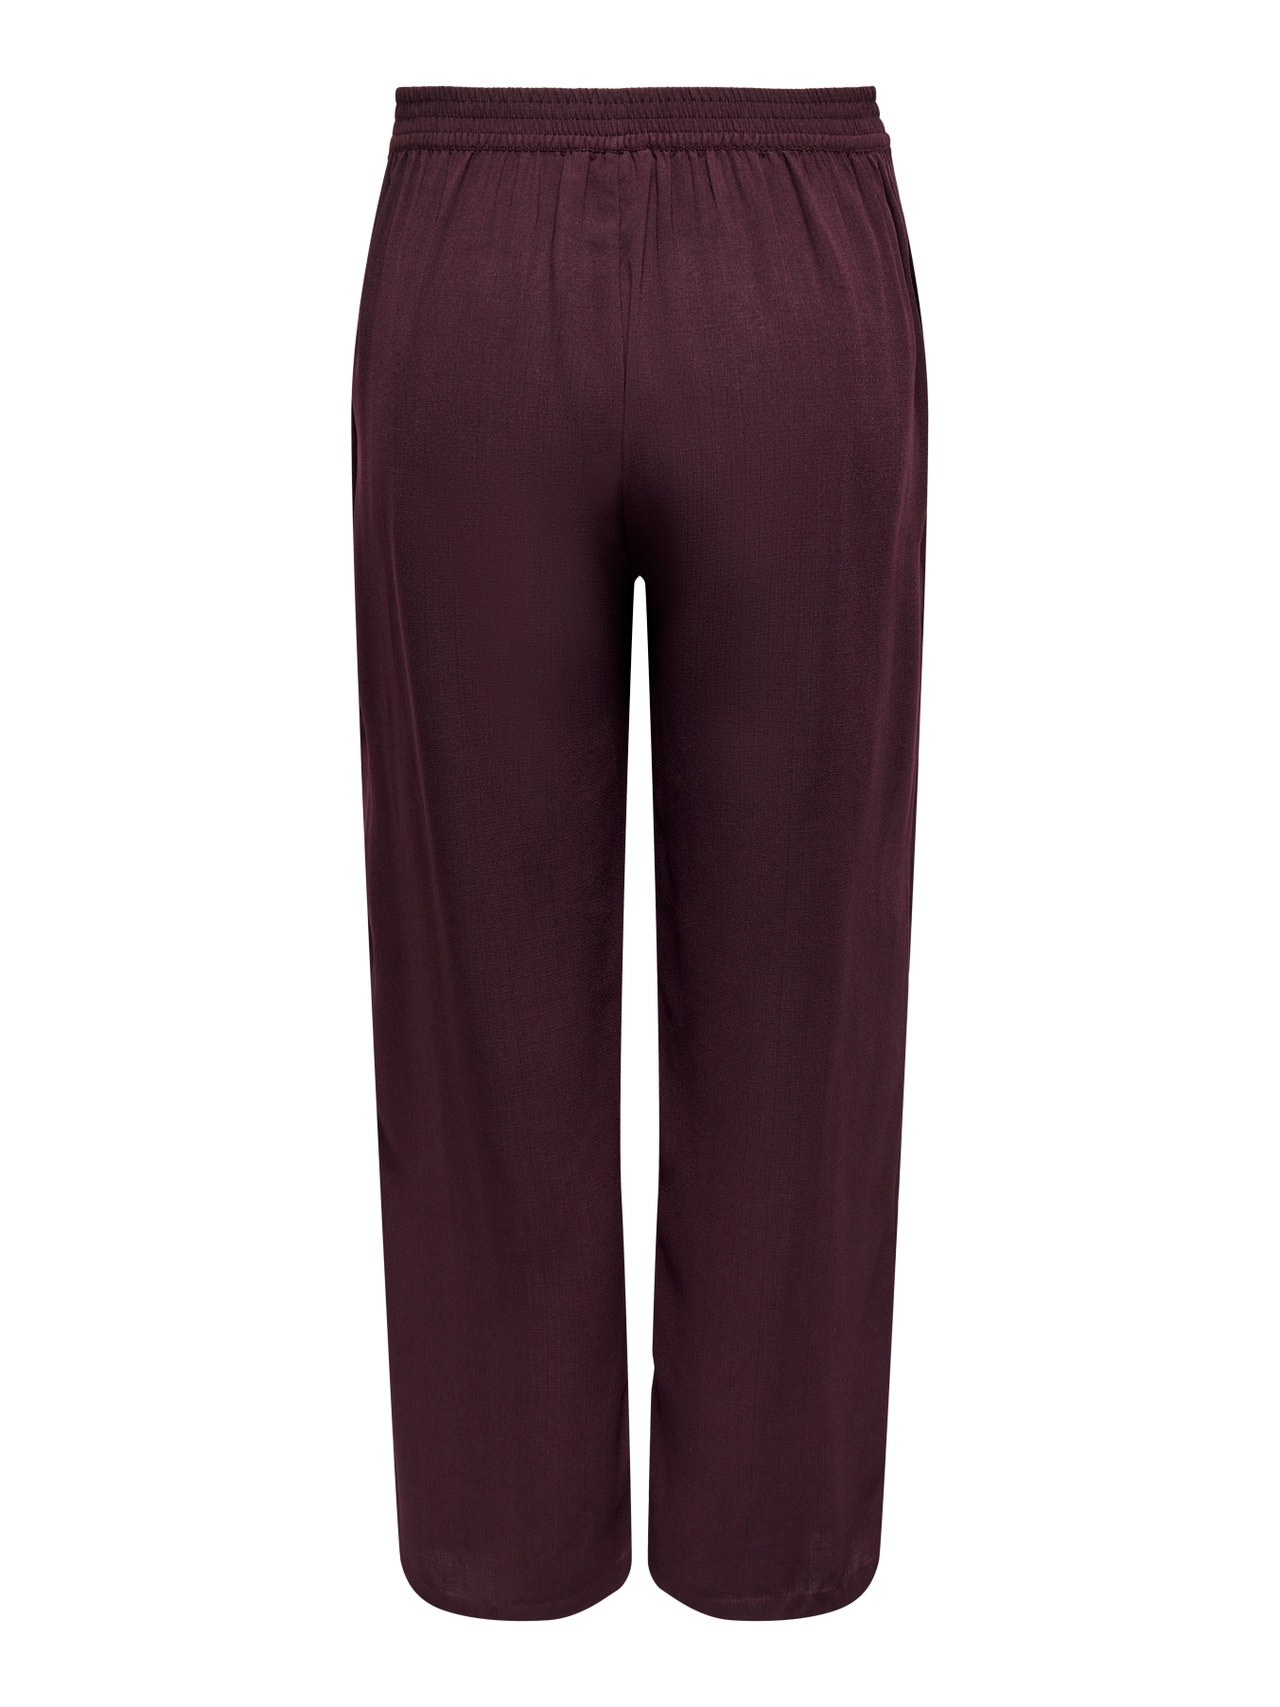 ONLY Regular Fit Trousers -Fudge - 15280517